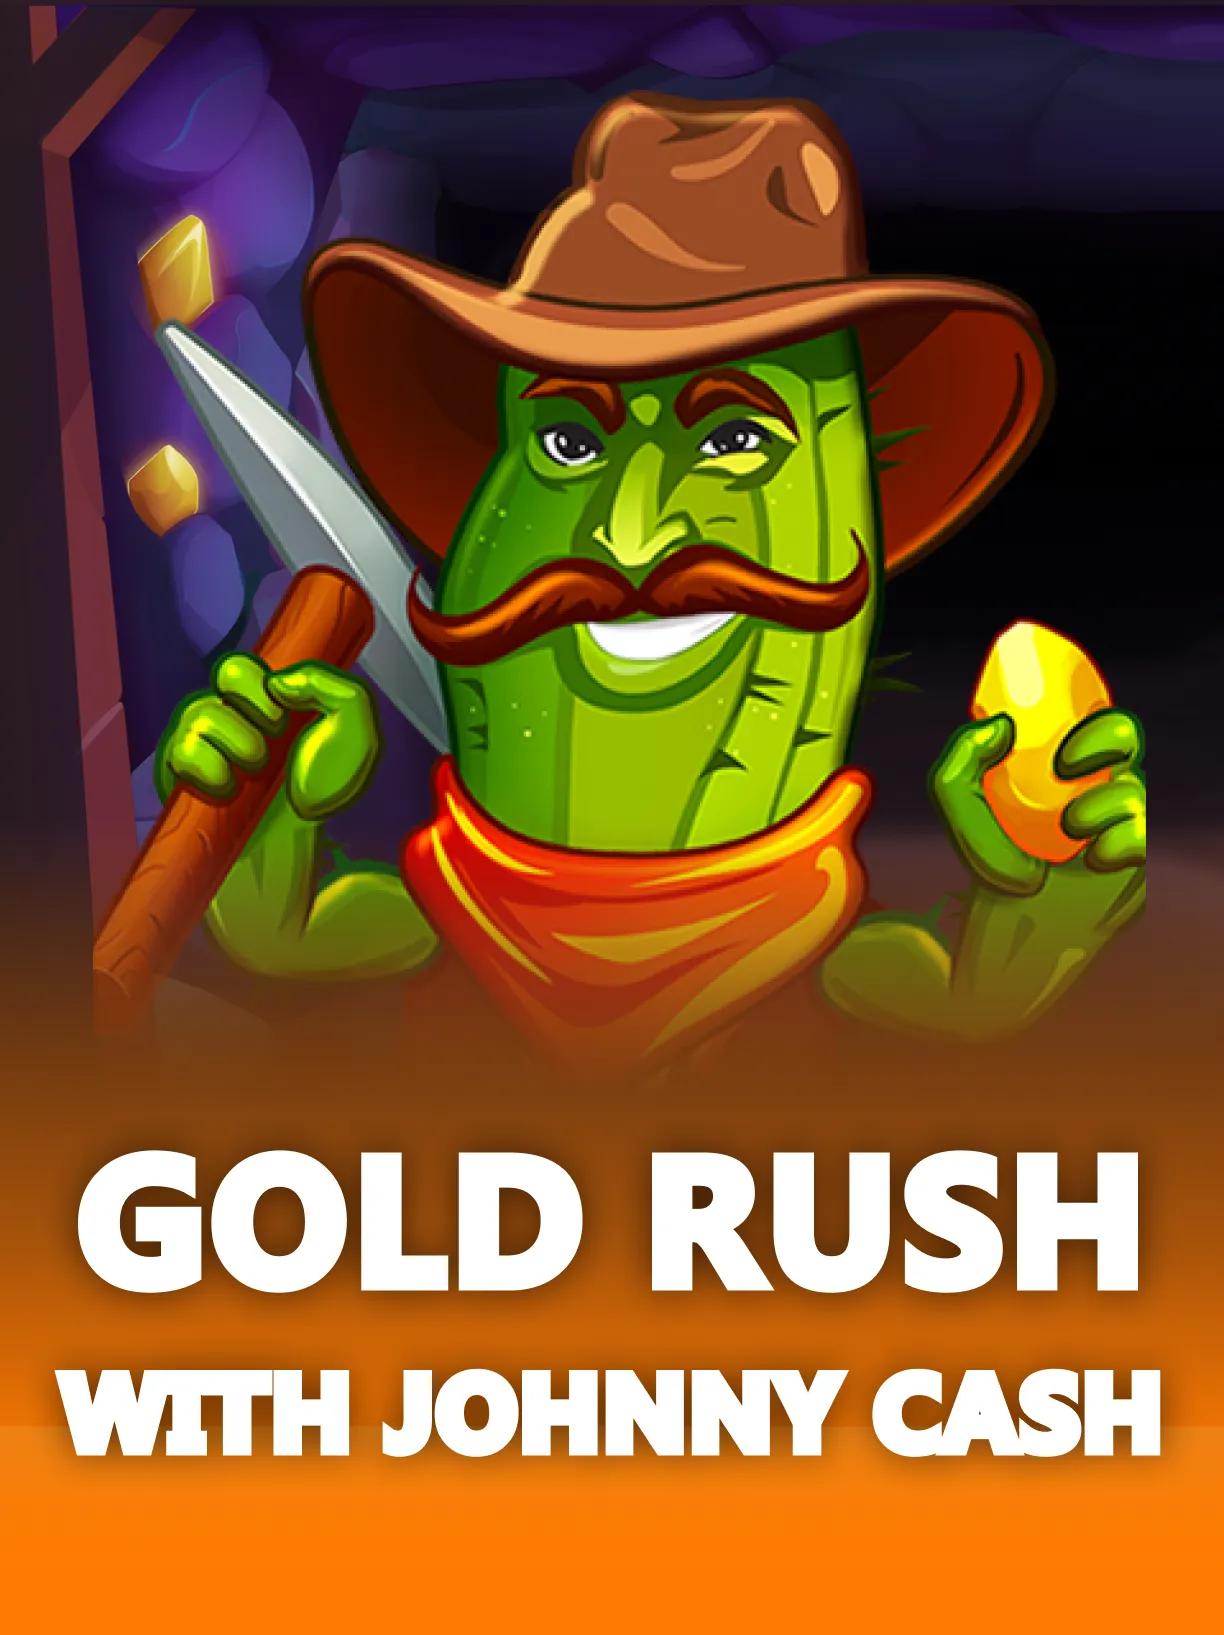 Gold_Rush_with_Johnny_Cash_square.webp